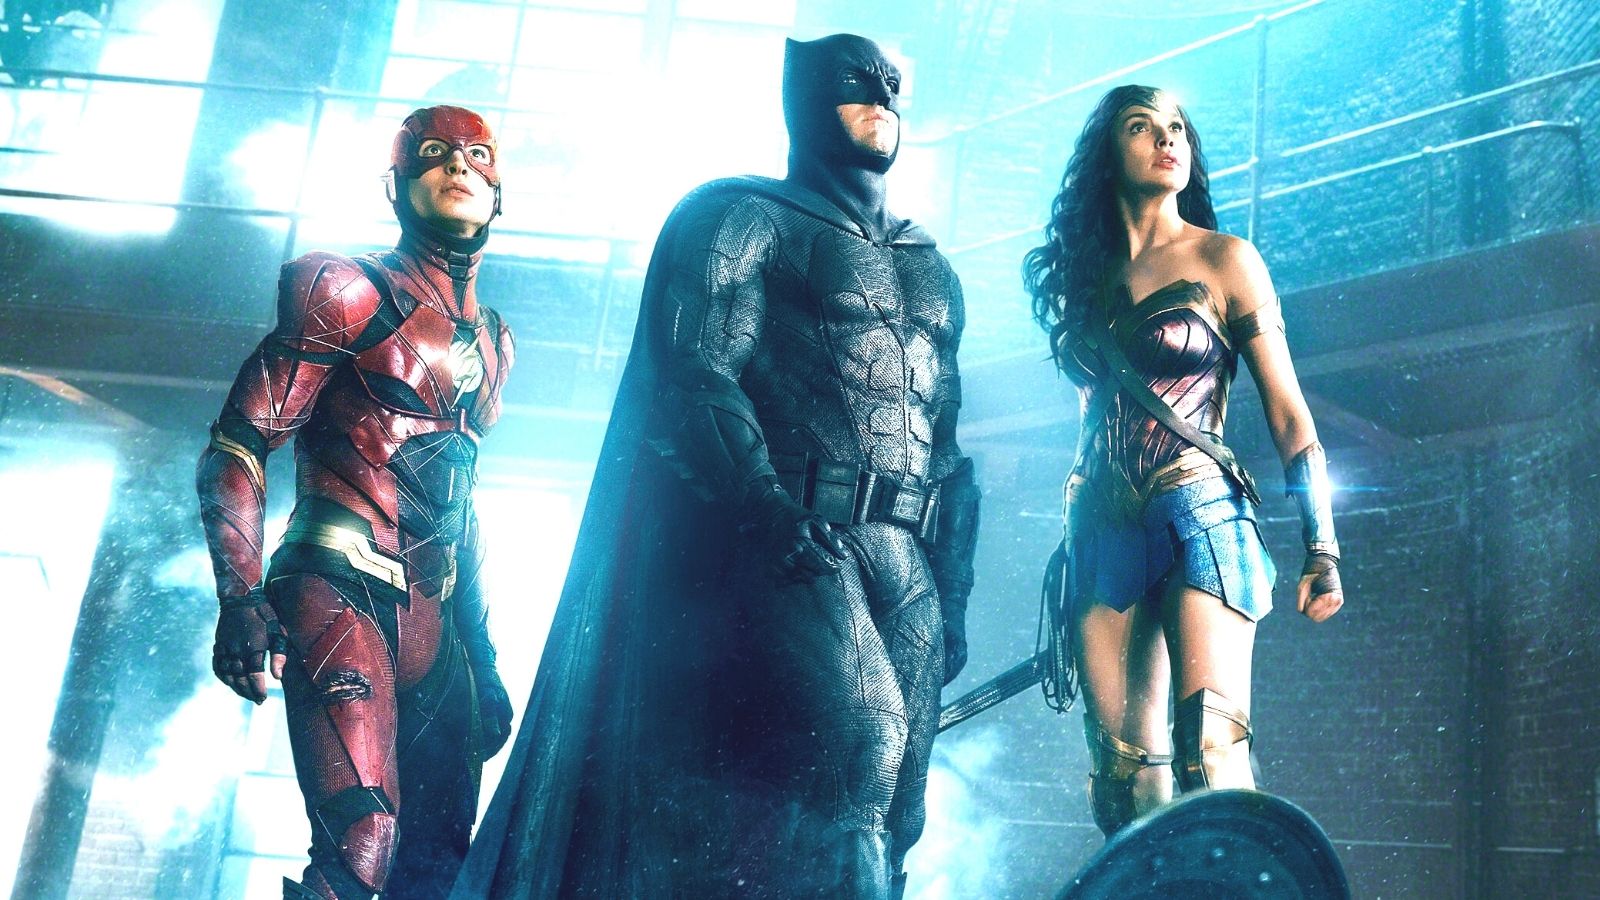 Zack Snyder's Justice League is coming to cinemas